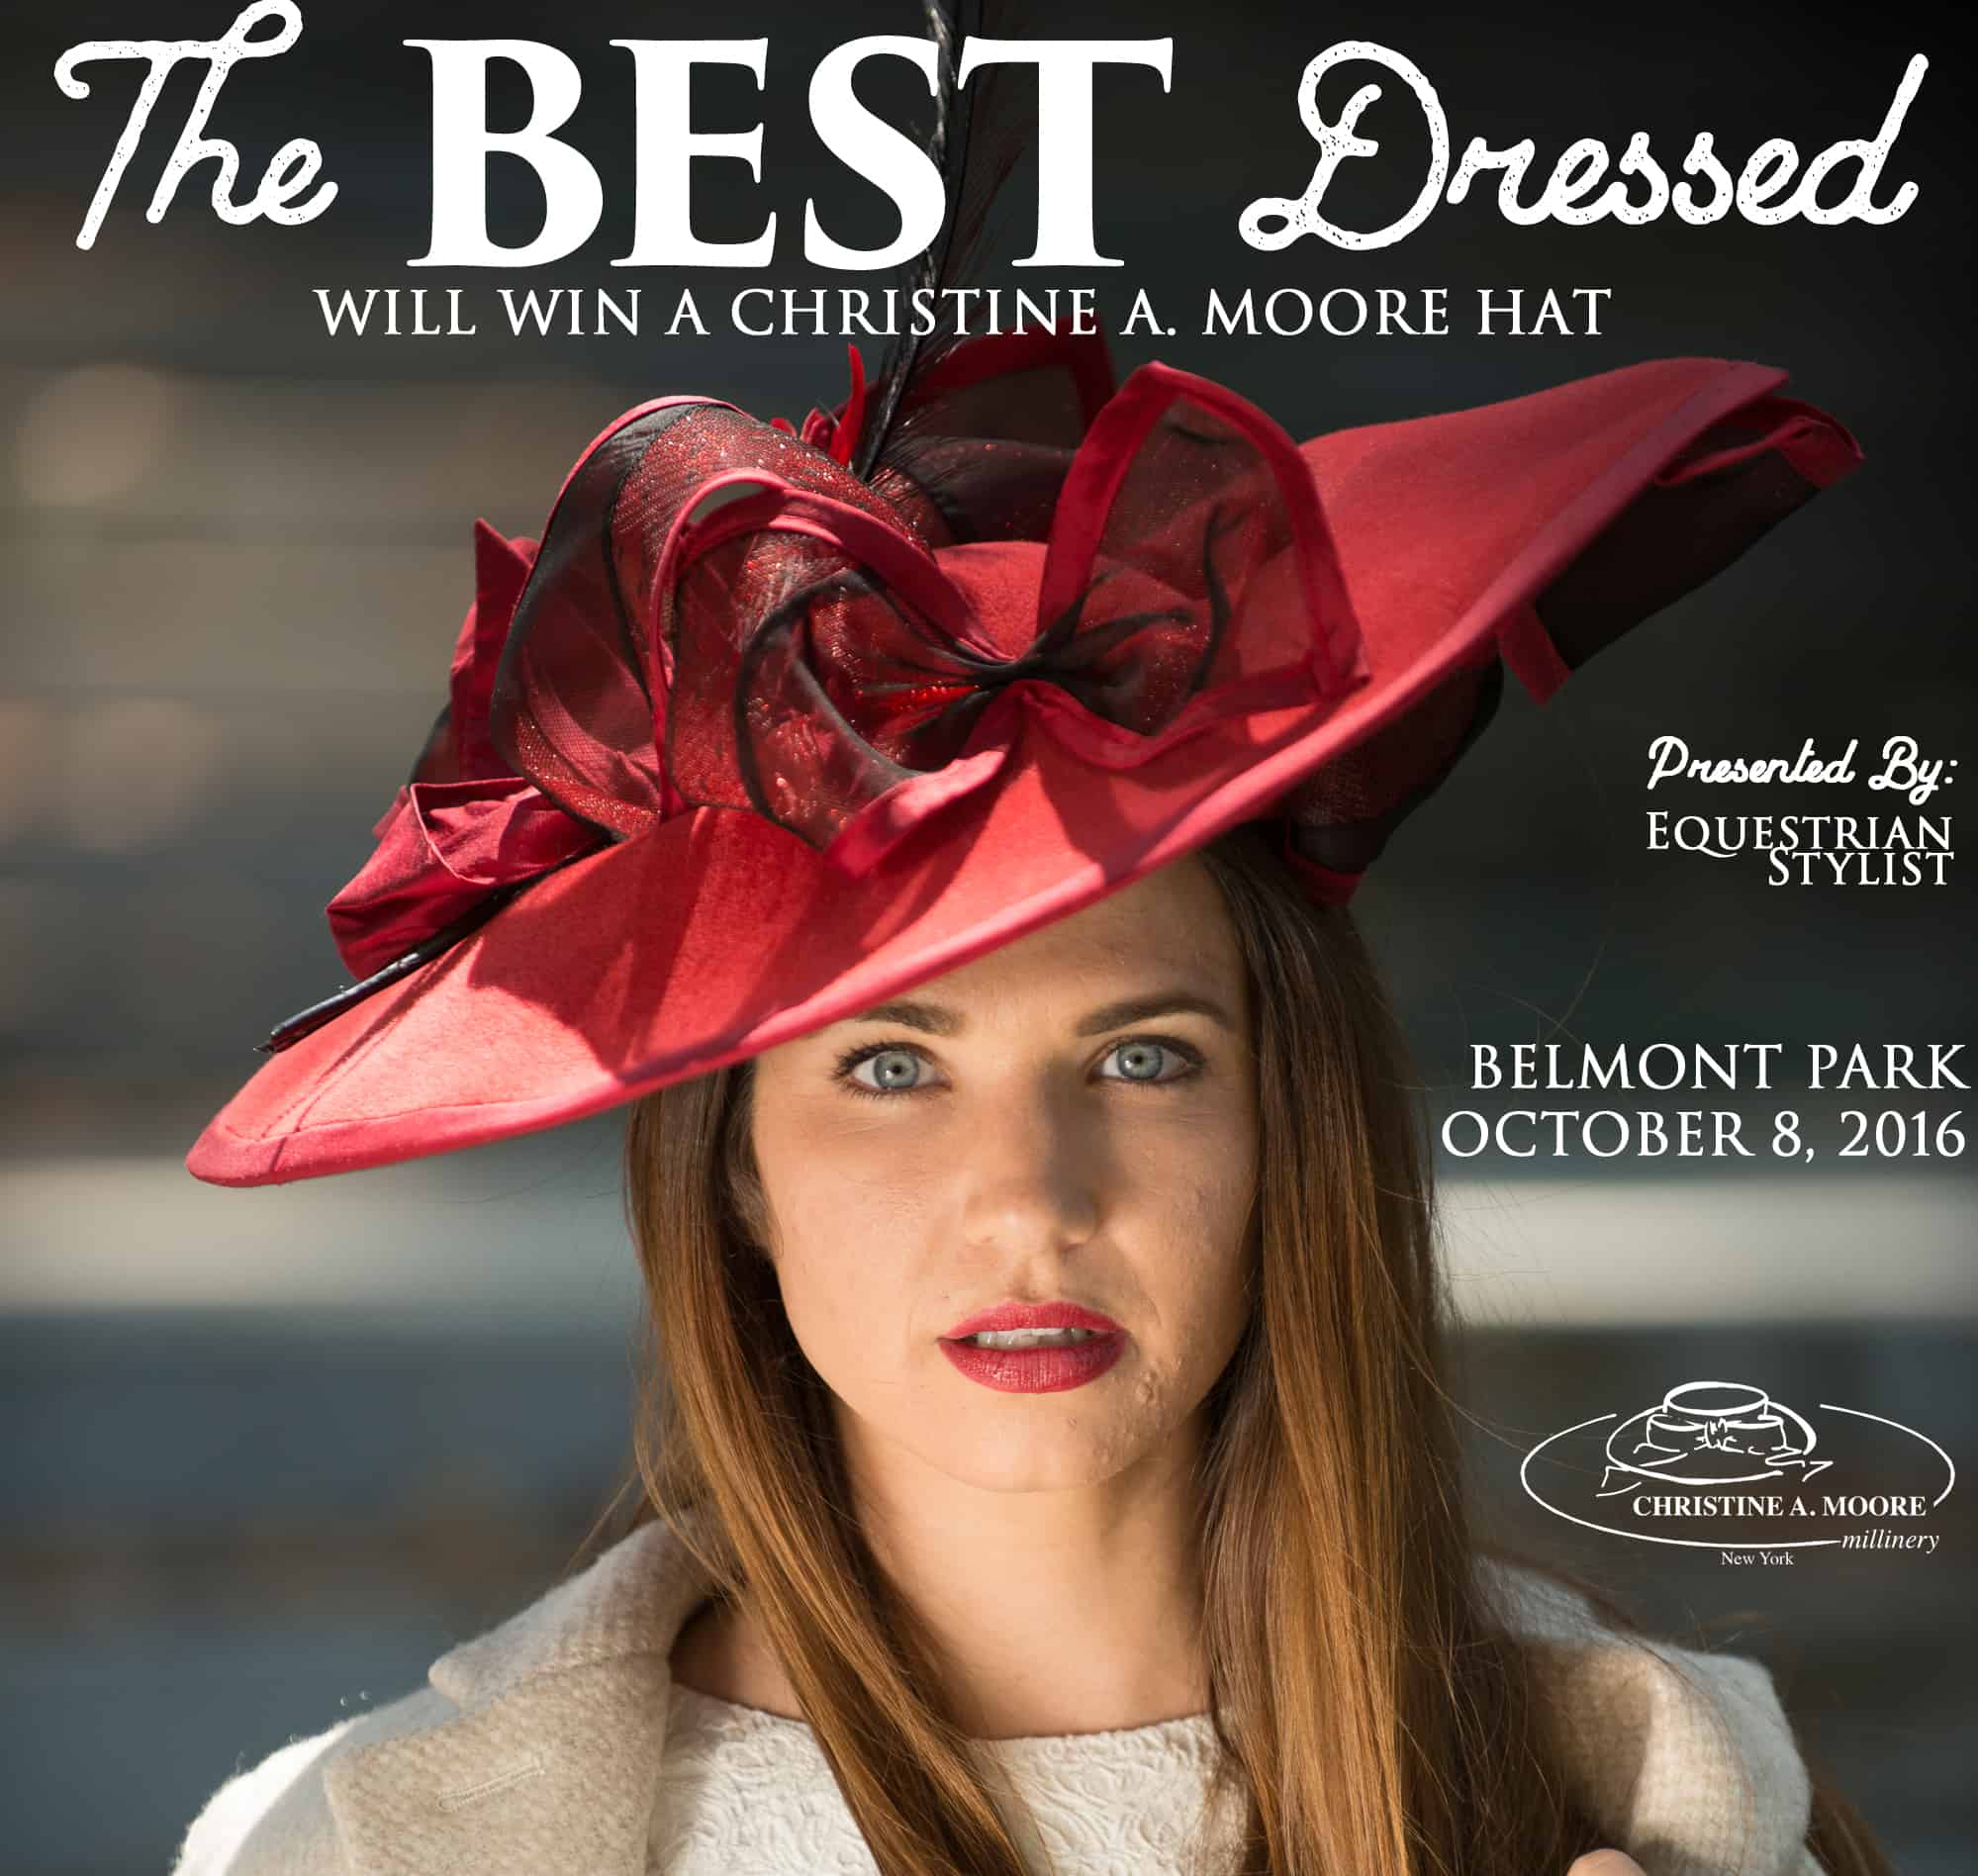 Scouting BEST Dressed at Belmont Park Oct. 8, 2016